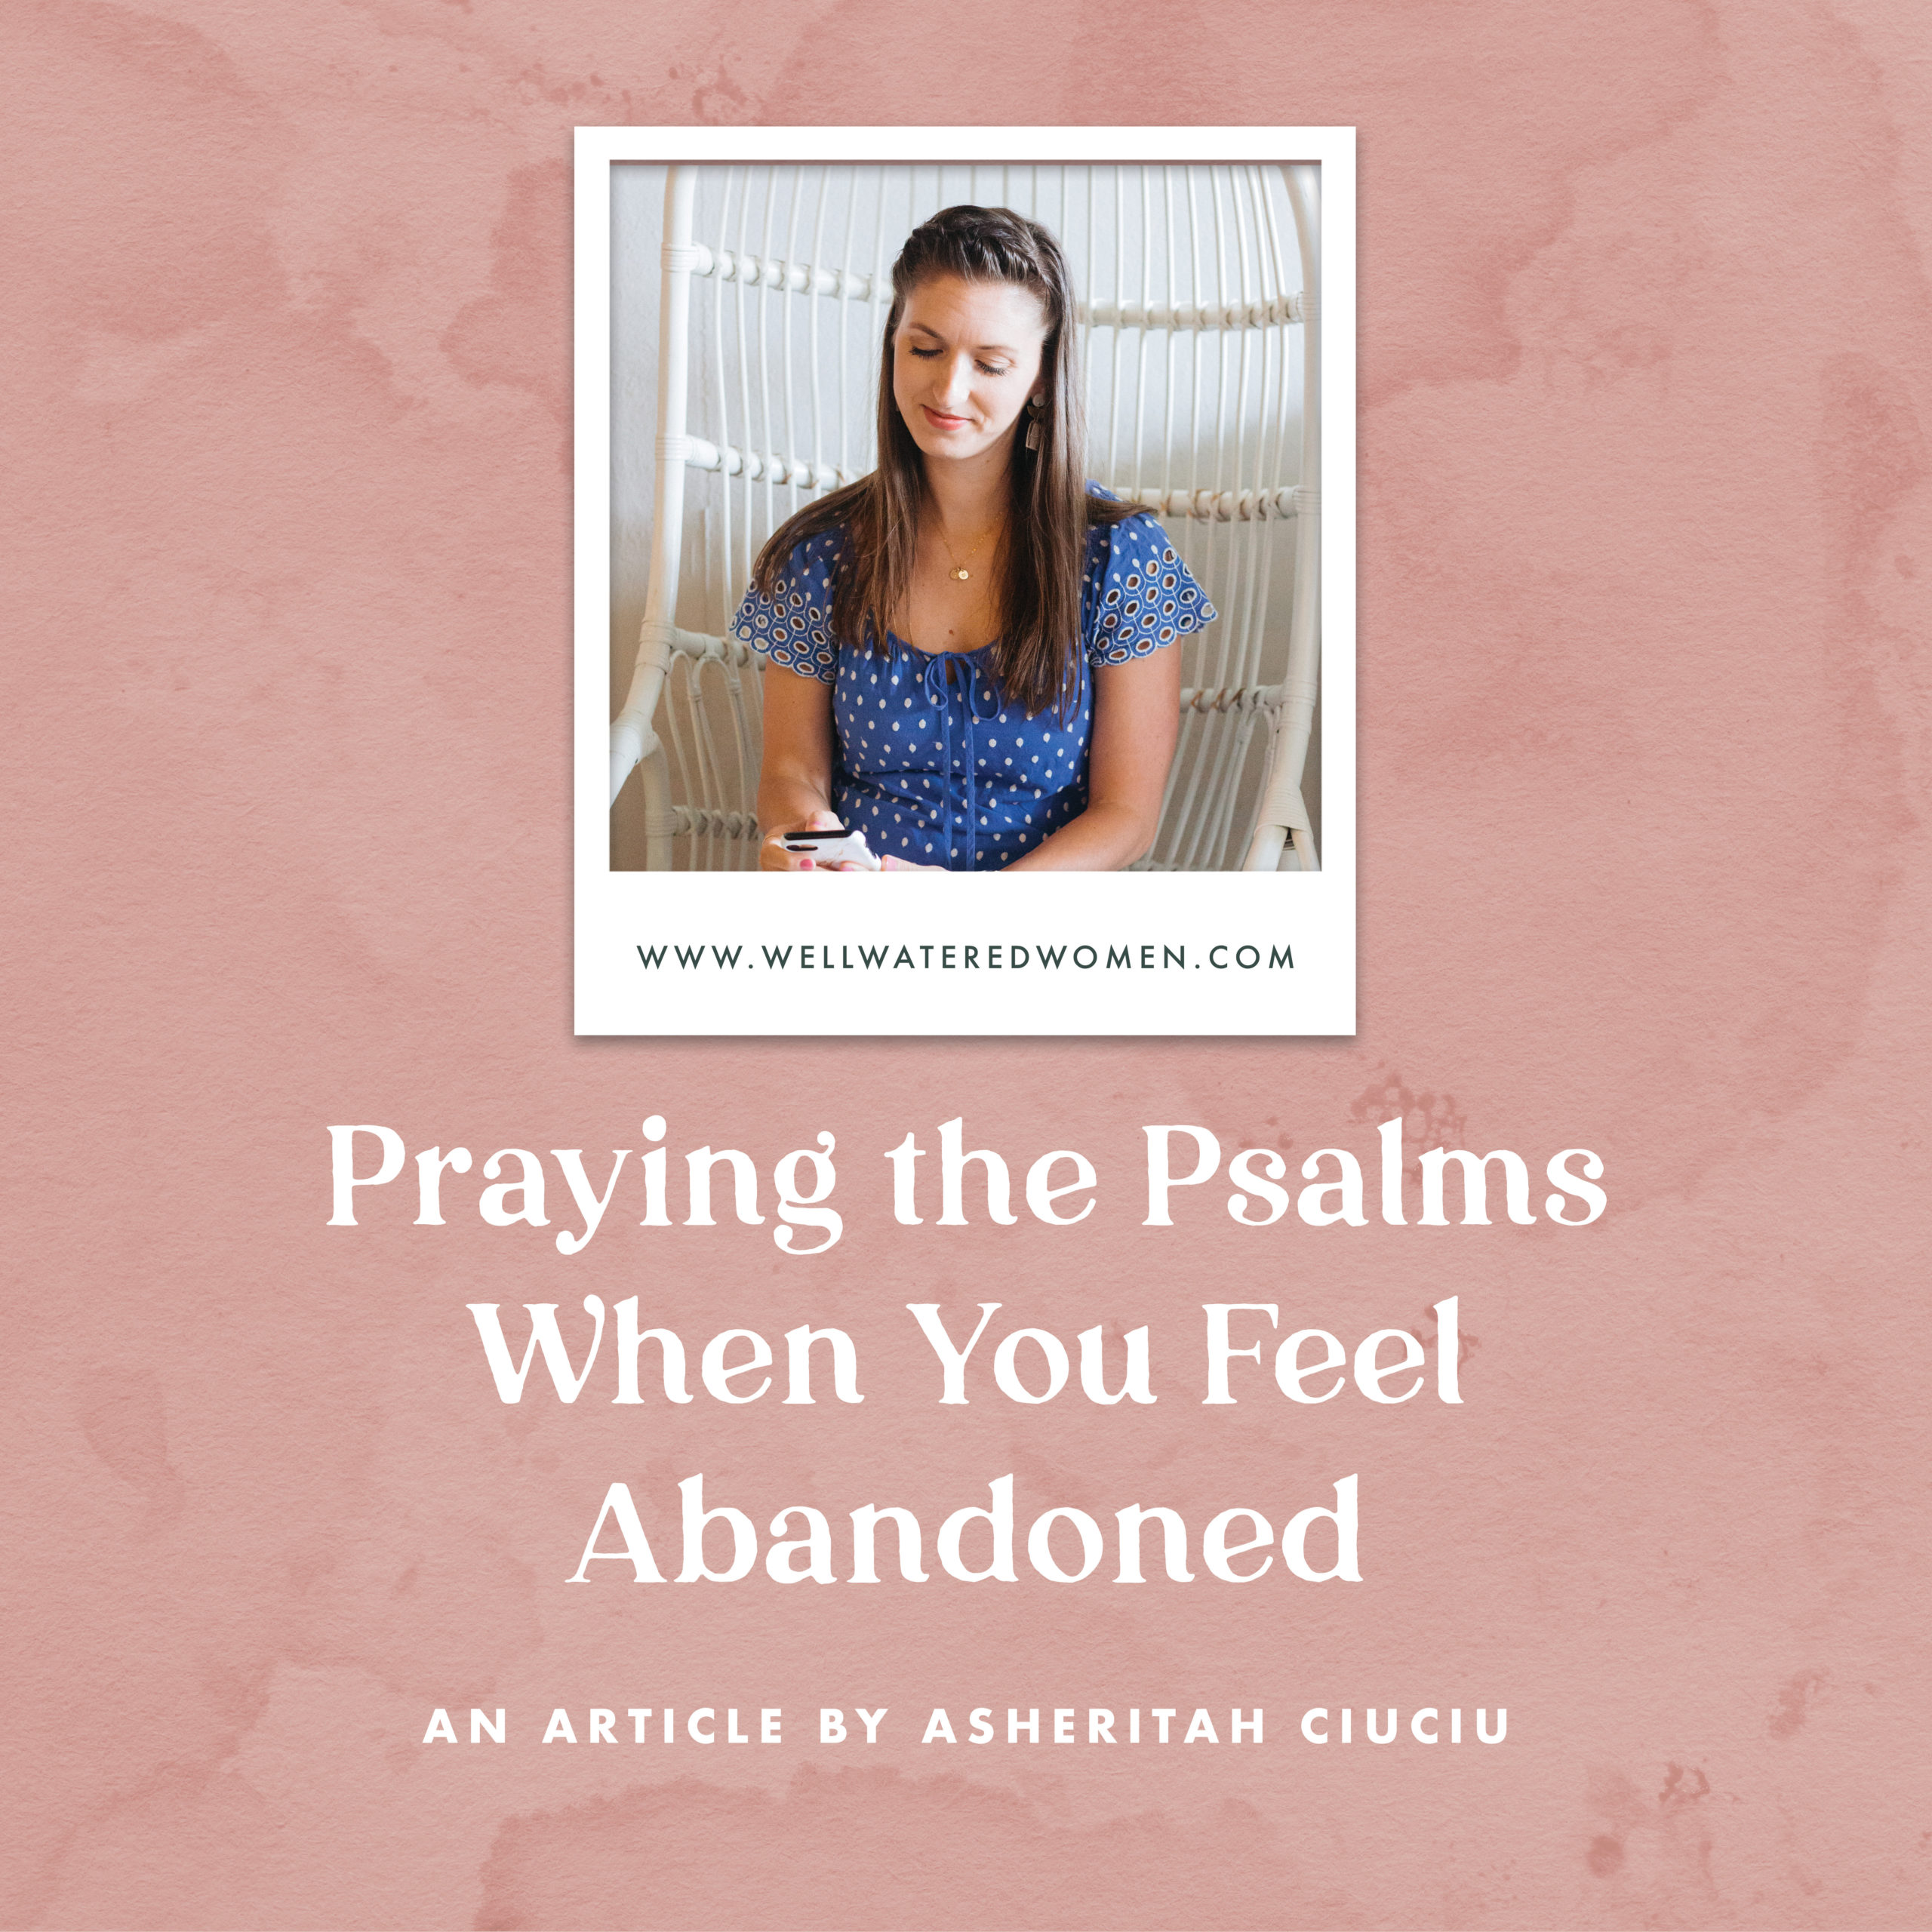 Praying the Psalms When You Feel Abandoned